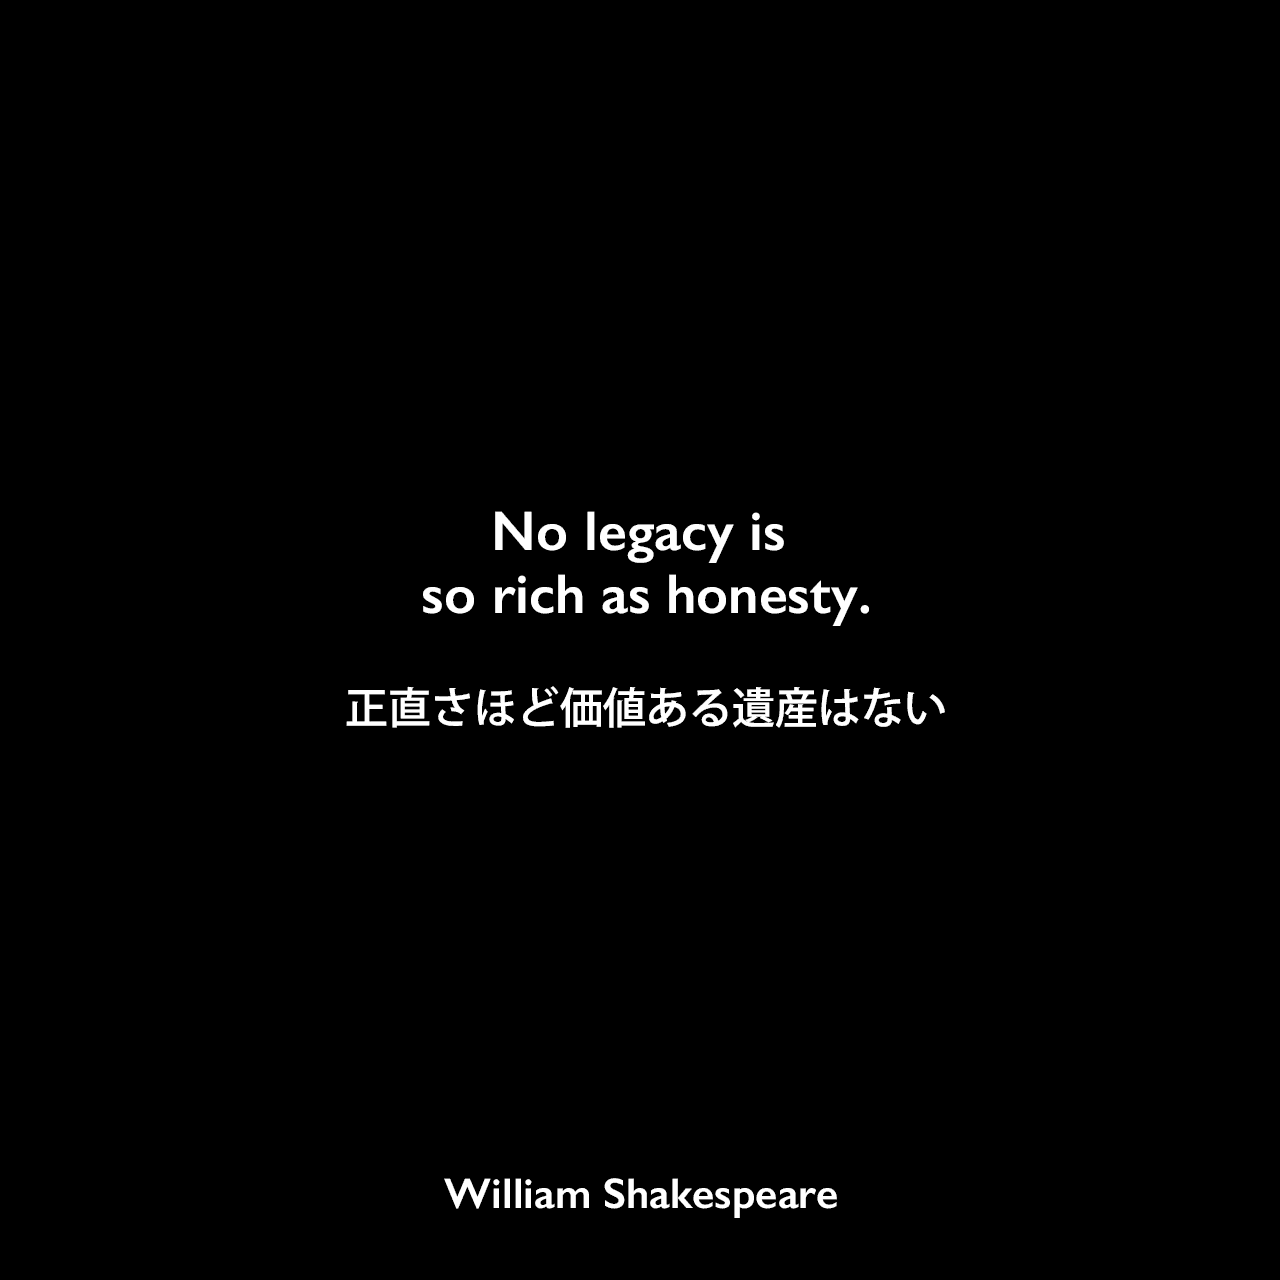 No legacy is so rich as honesty.正直さほど価値ある遺産はないWilliam Shakespeare